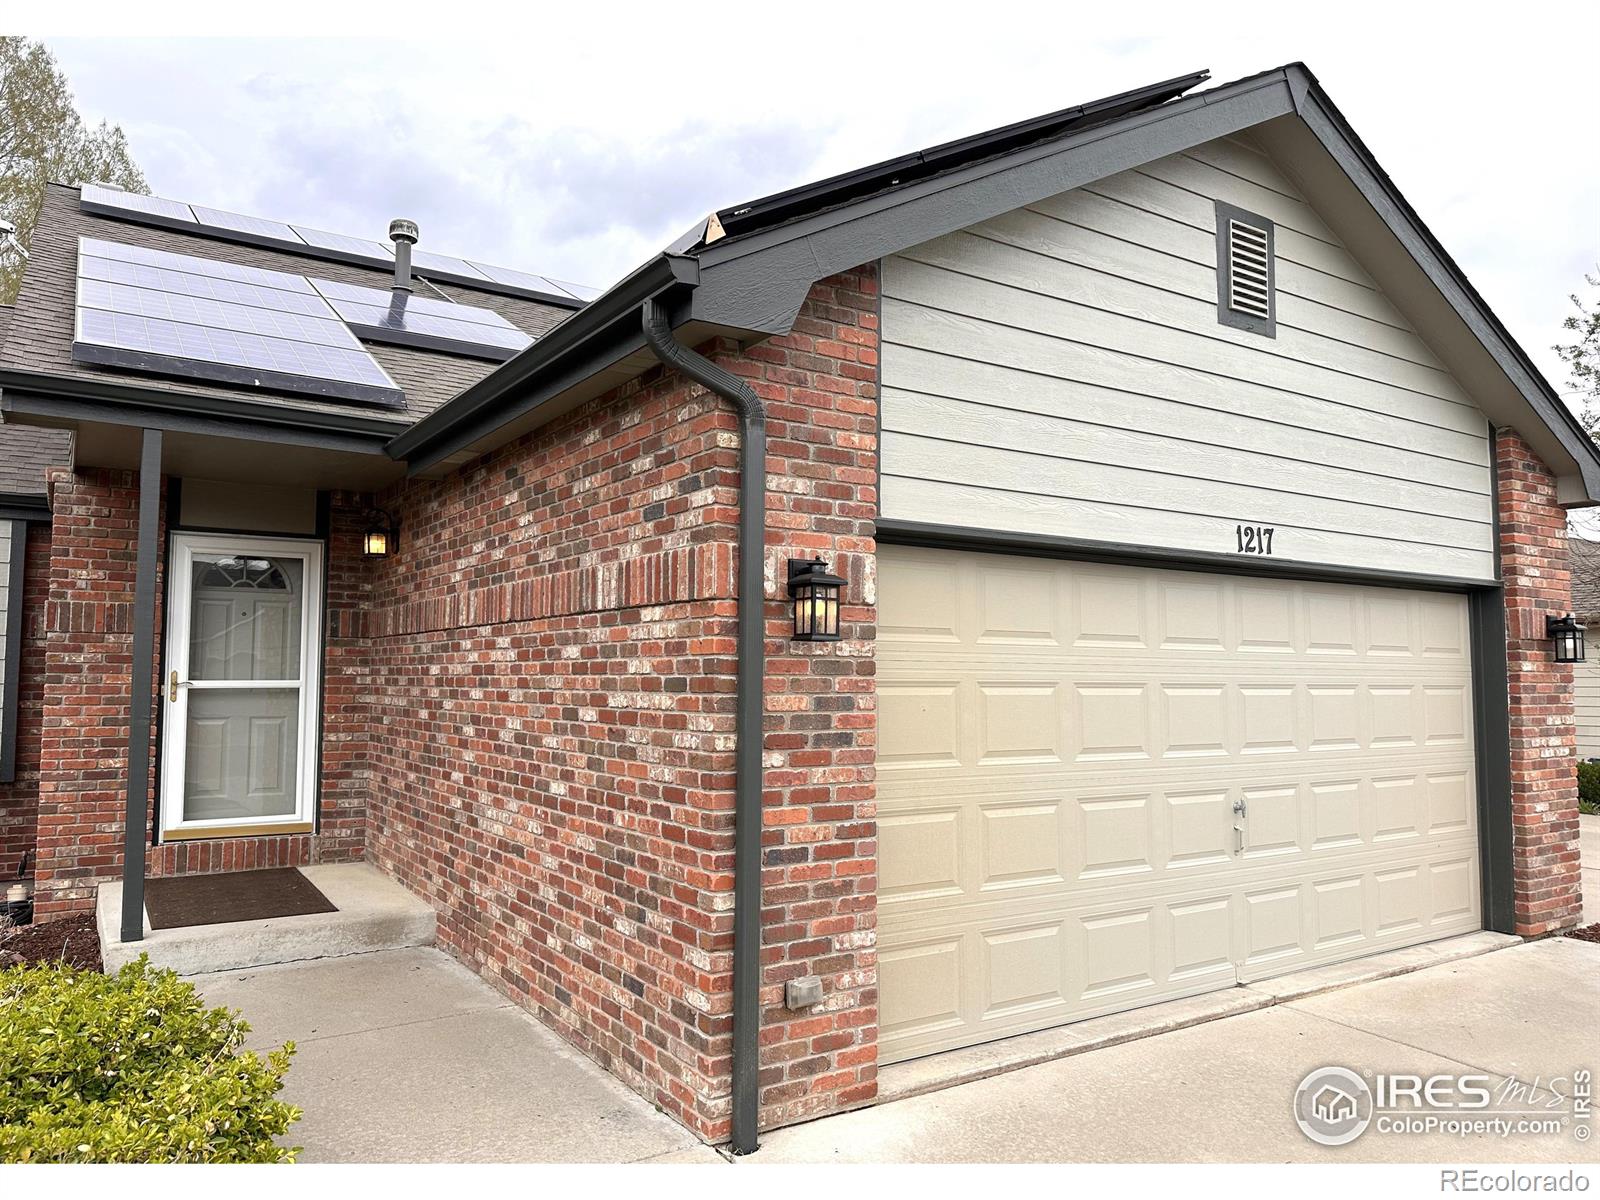 Report Image for 1217 N 4th Street,Johnstown, Colorado